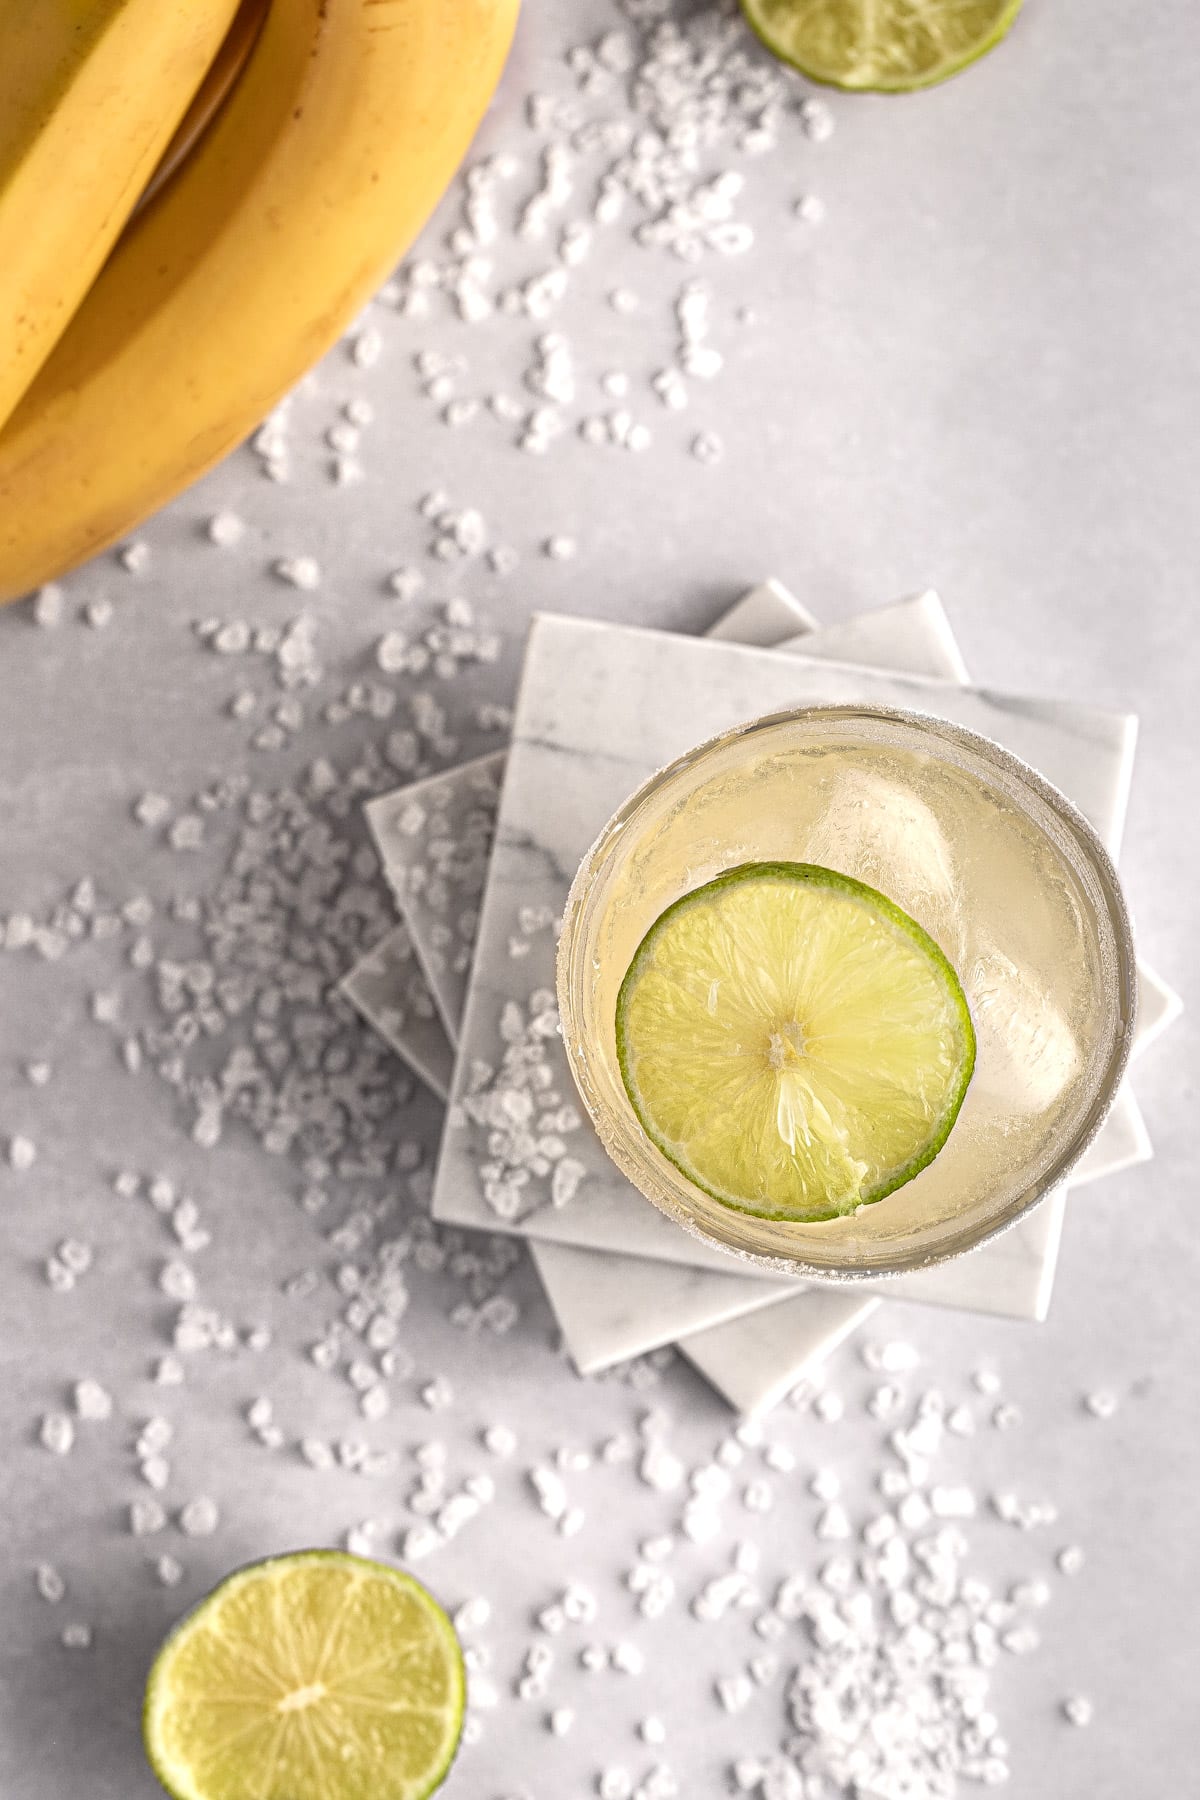 Overhead view of a banana margarita with a slice of lime in the glass, on a white table.